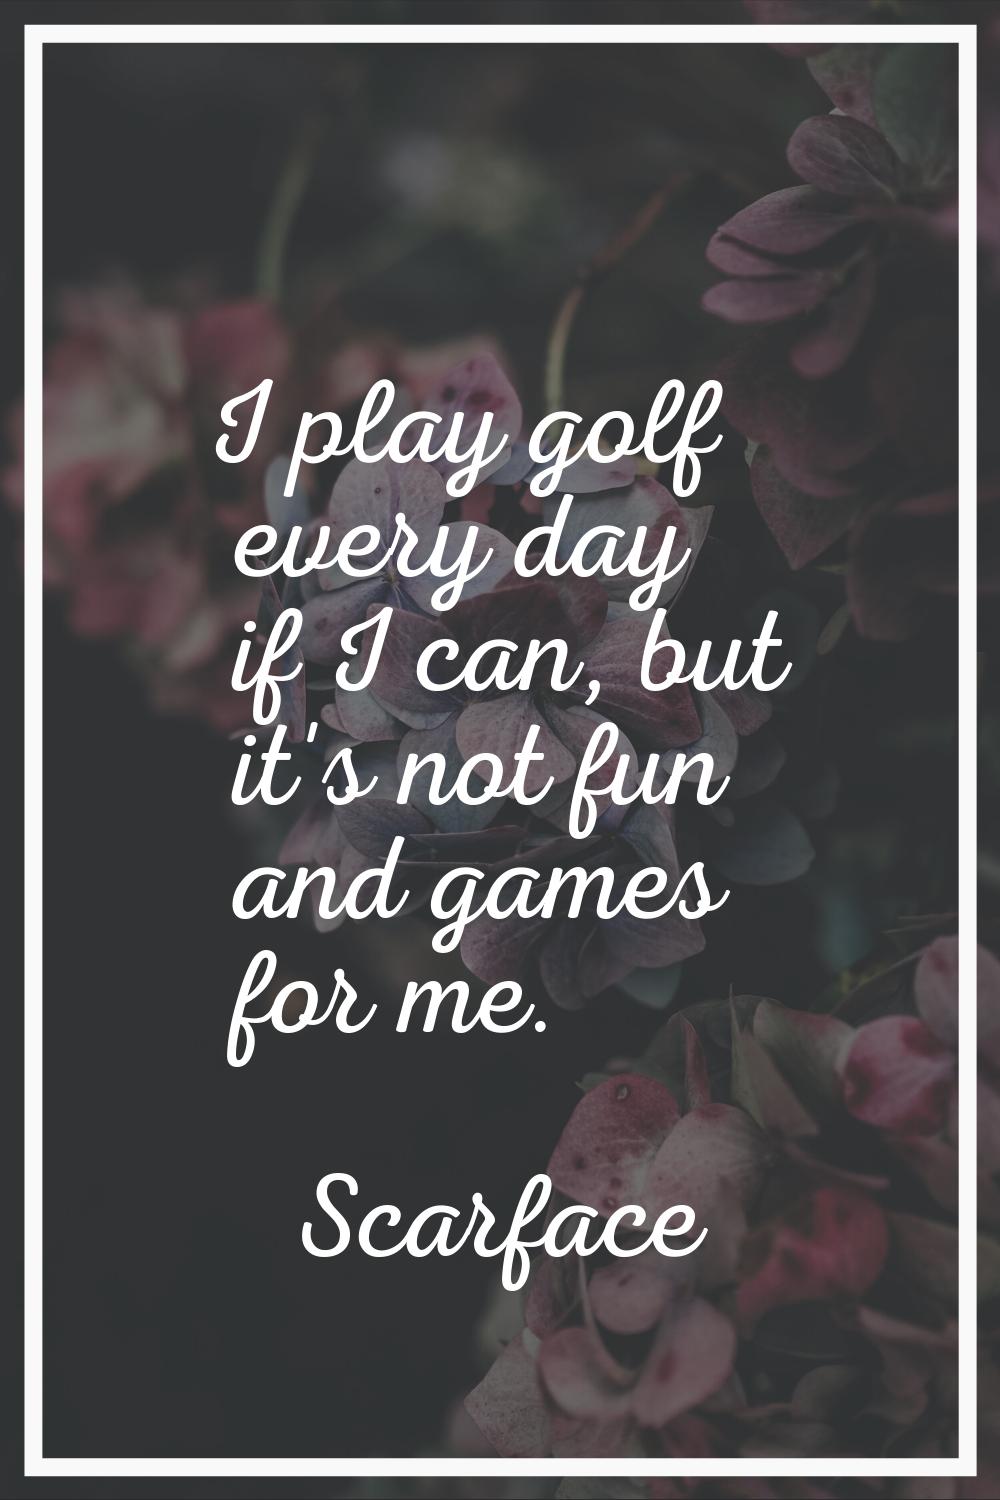 I play golf every day if I can, but it's not fun and games for me.